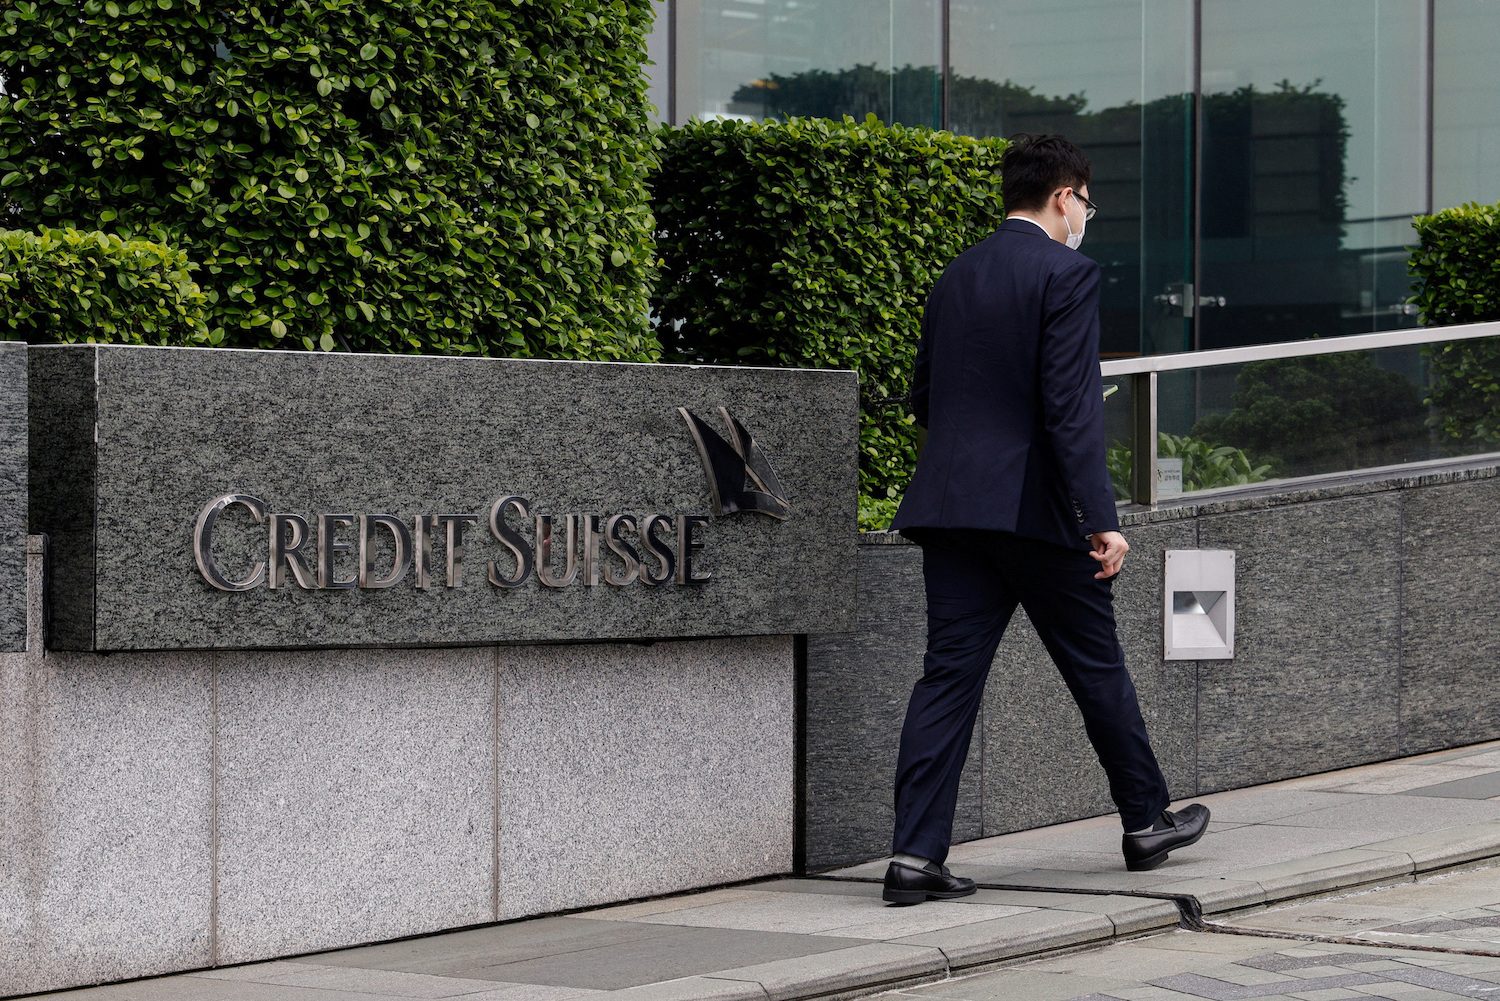 Credit Suisse says some clients may want to move wealth assets after UBS deal – memo